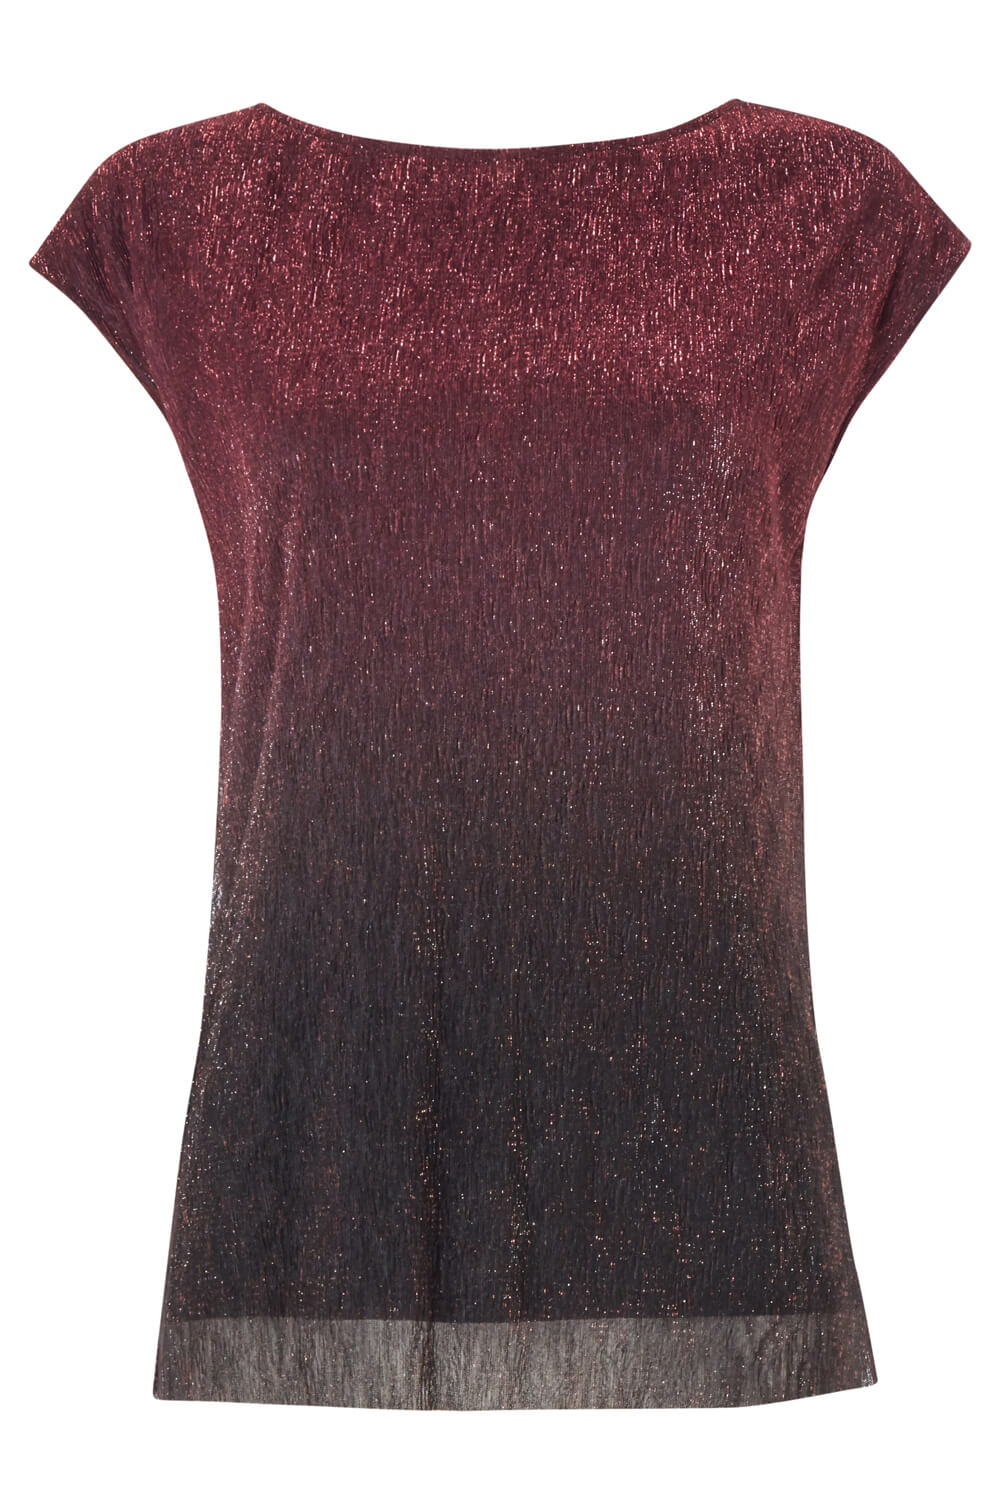 Purple Ombre Shimmer Plisse Top, Image 6 of 6